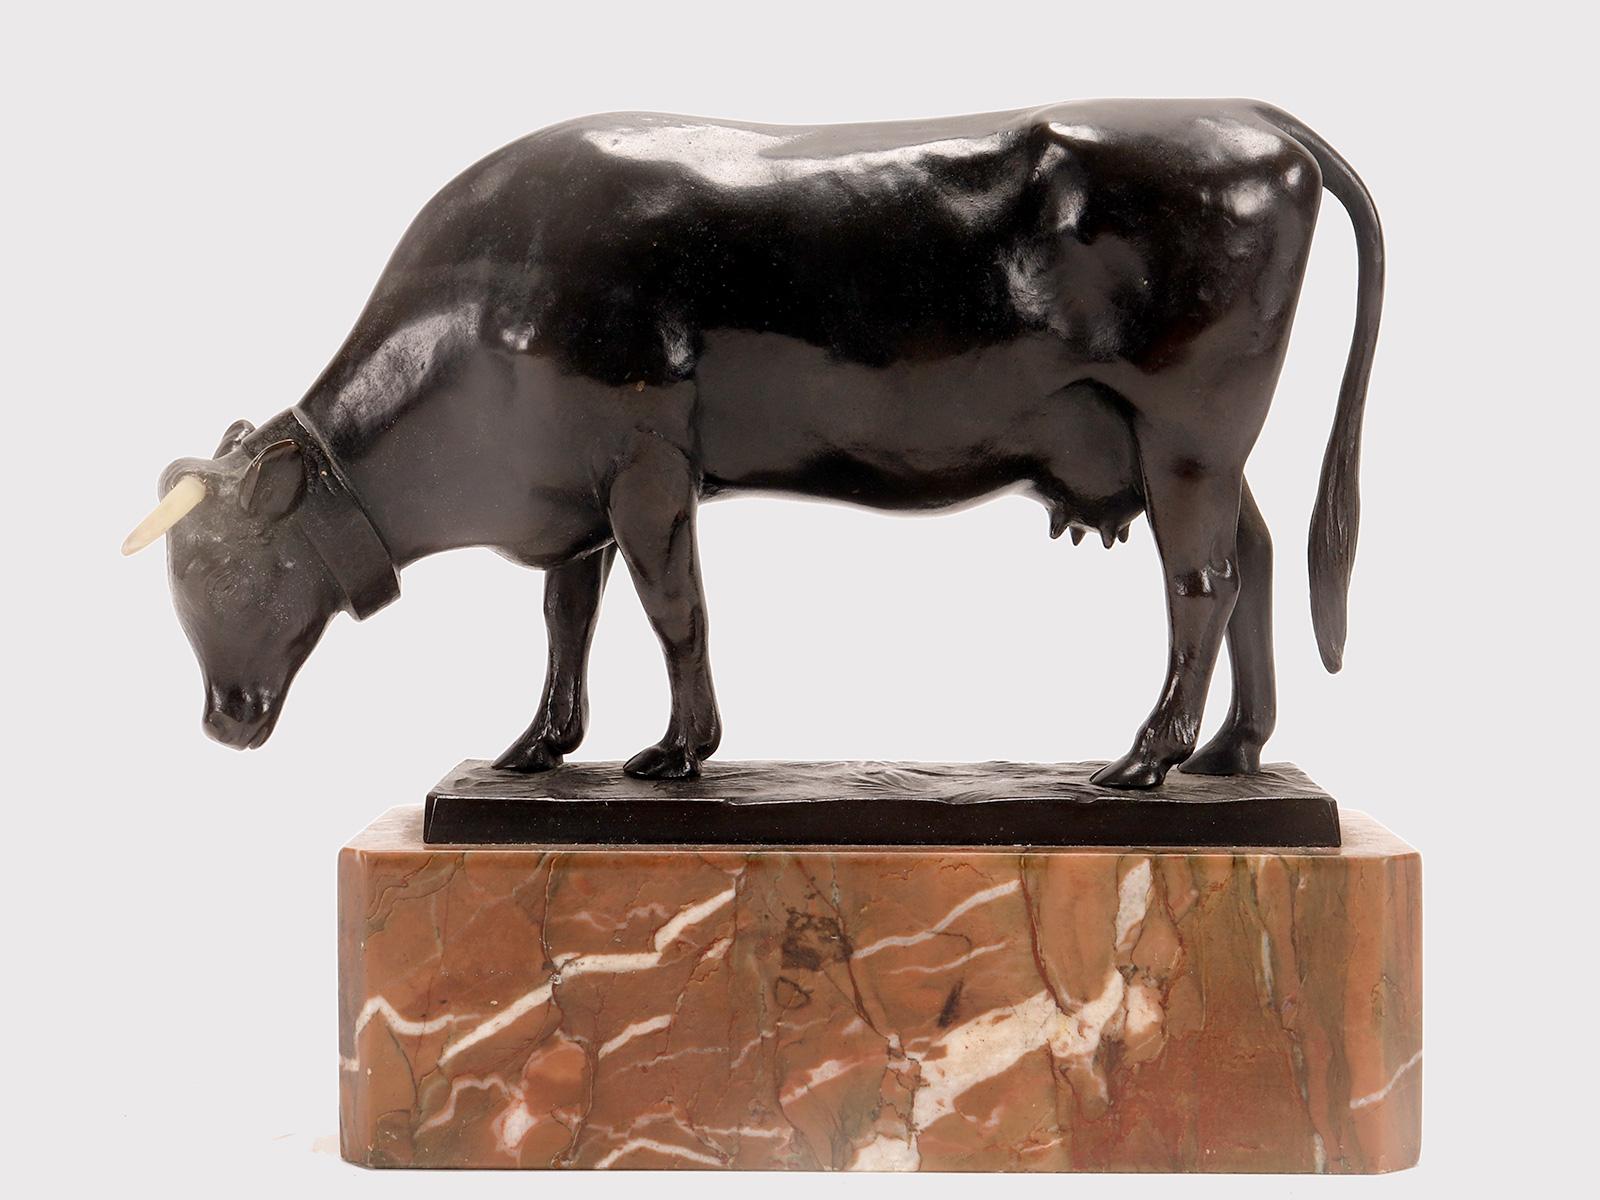 A lost wax bronze sculpture depicting a cow grazing on a meadow, on a Verona red marble base. The cow's horns are made of bovine horn. Signed Moseritz. France circa 1880.